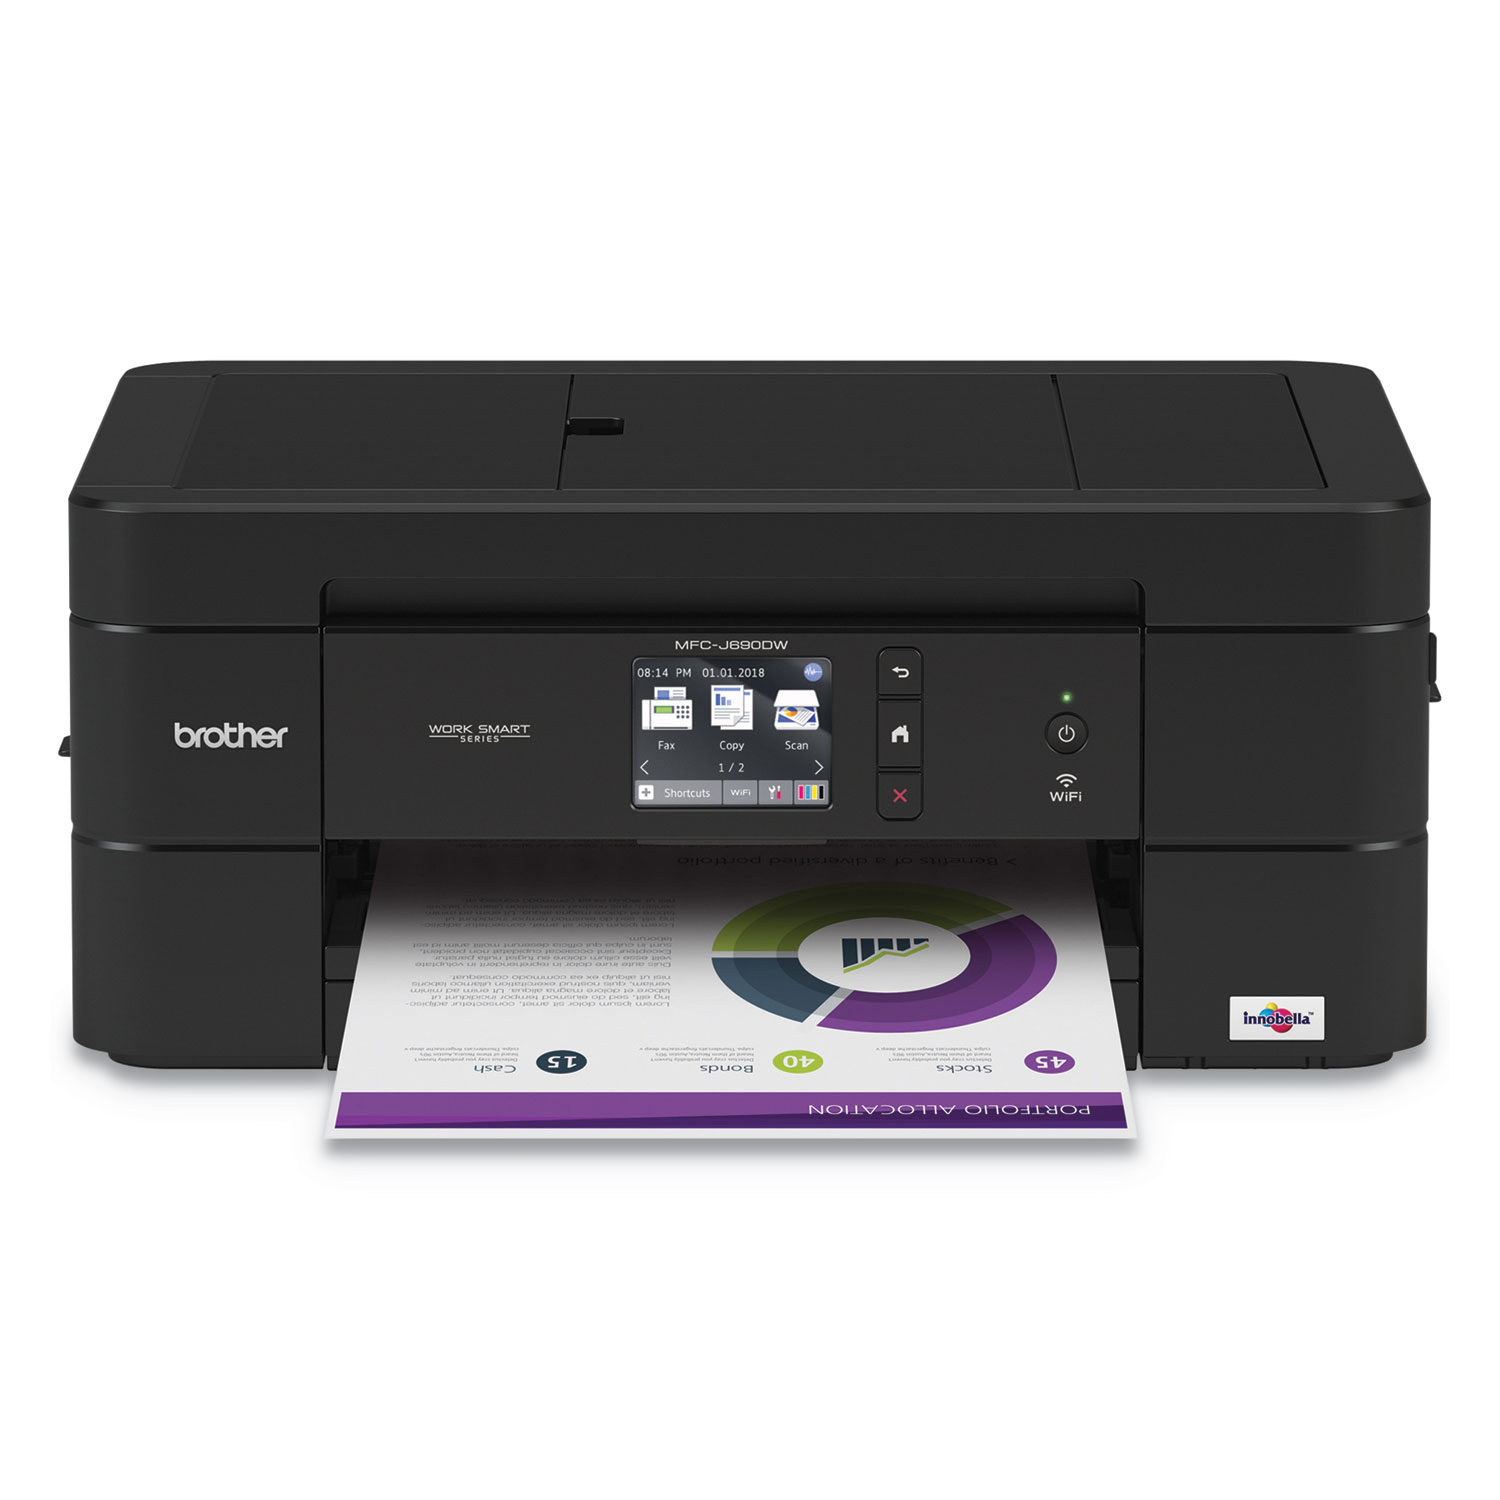 MFC-J690DW Wireless Color Inkjet All-in-One Printer, Copy/Fax/Print/Scan